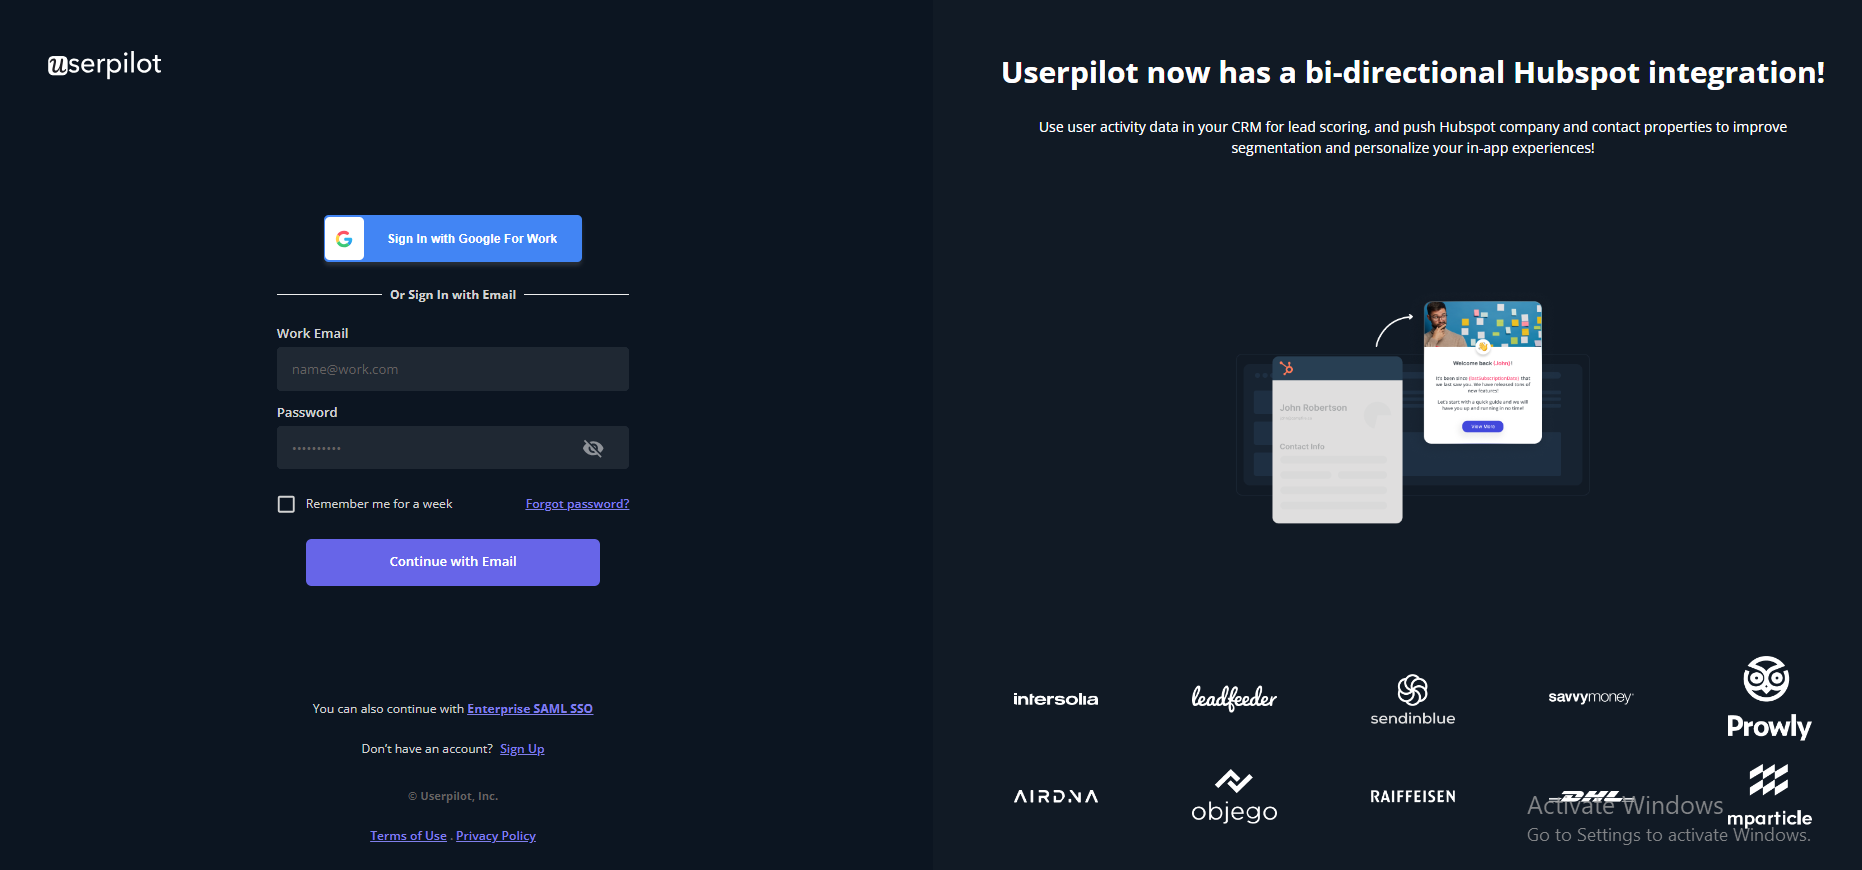 Use a simple signup process to avoid overwhelming users.